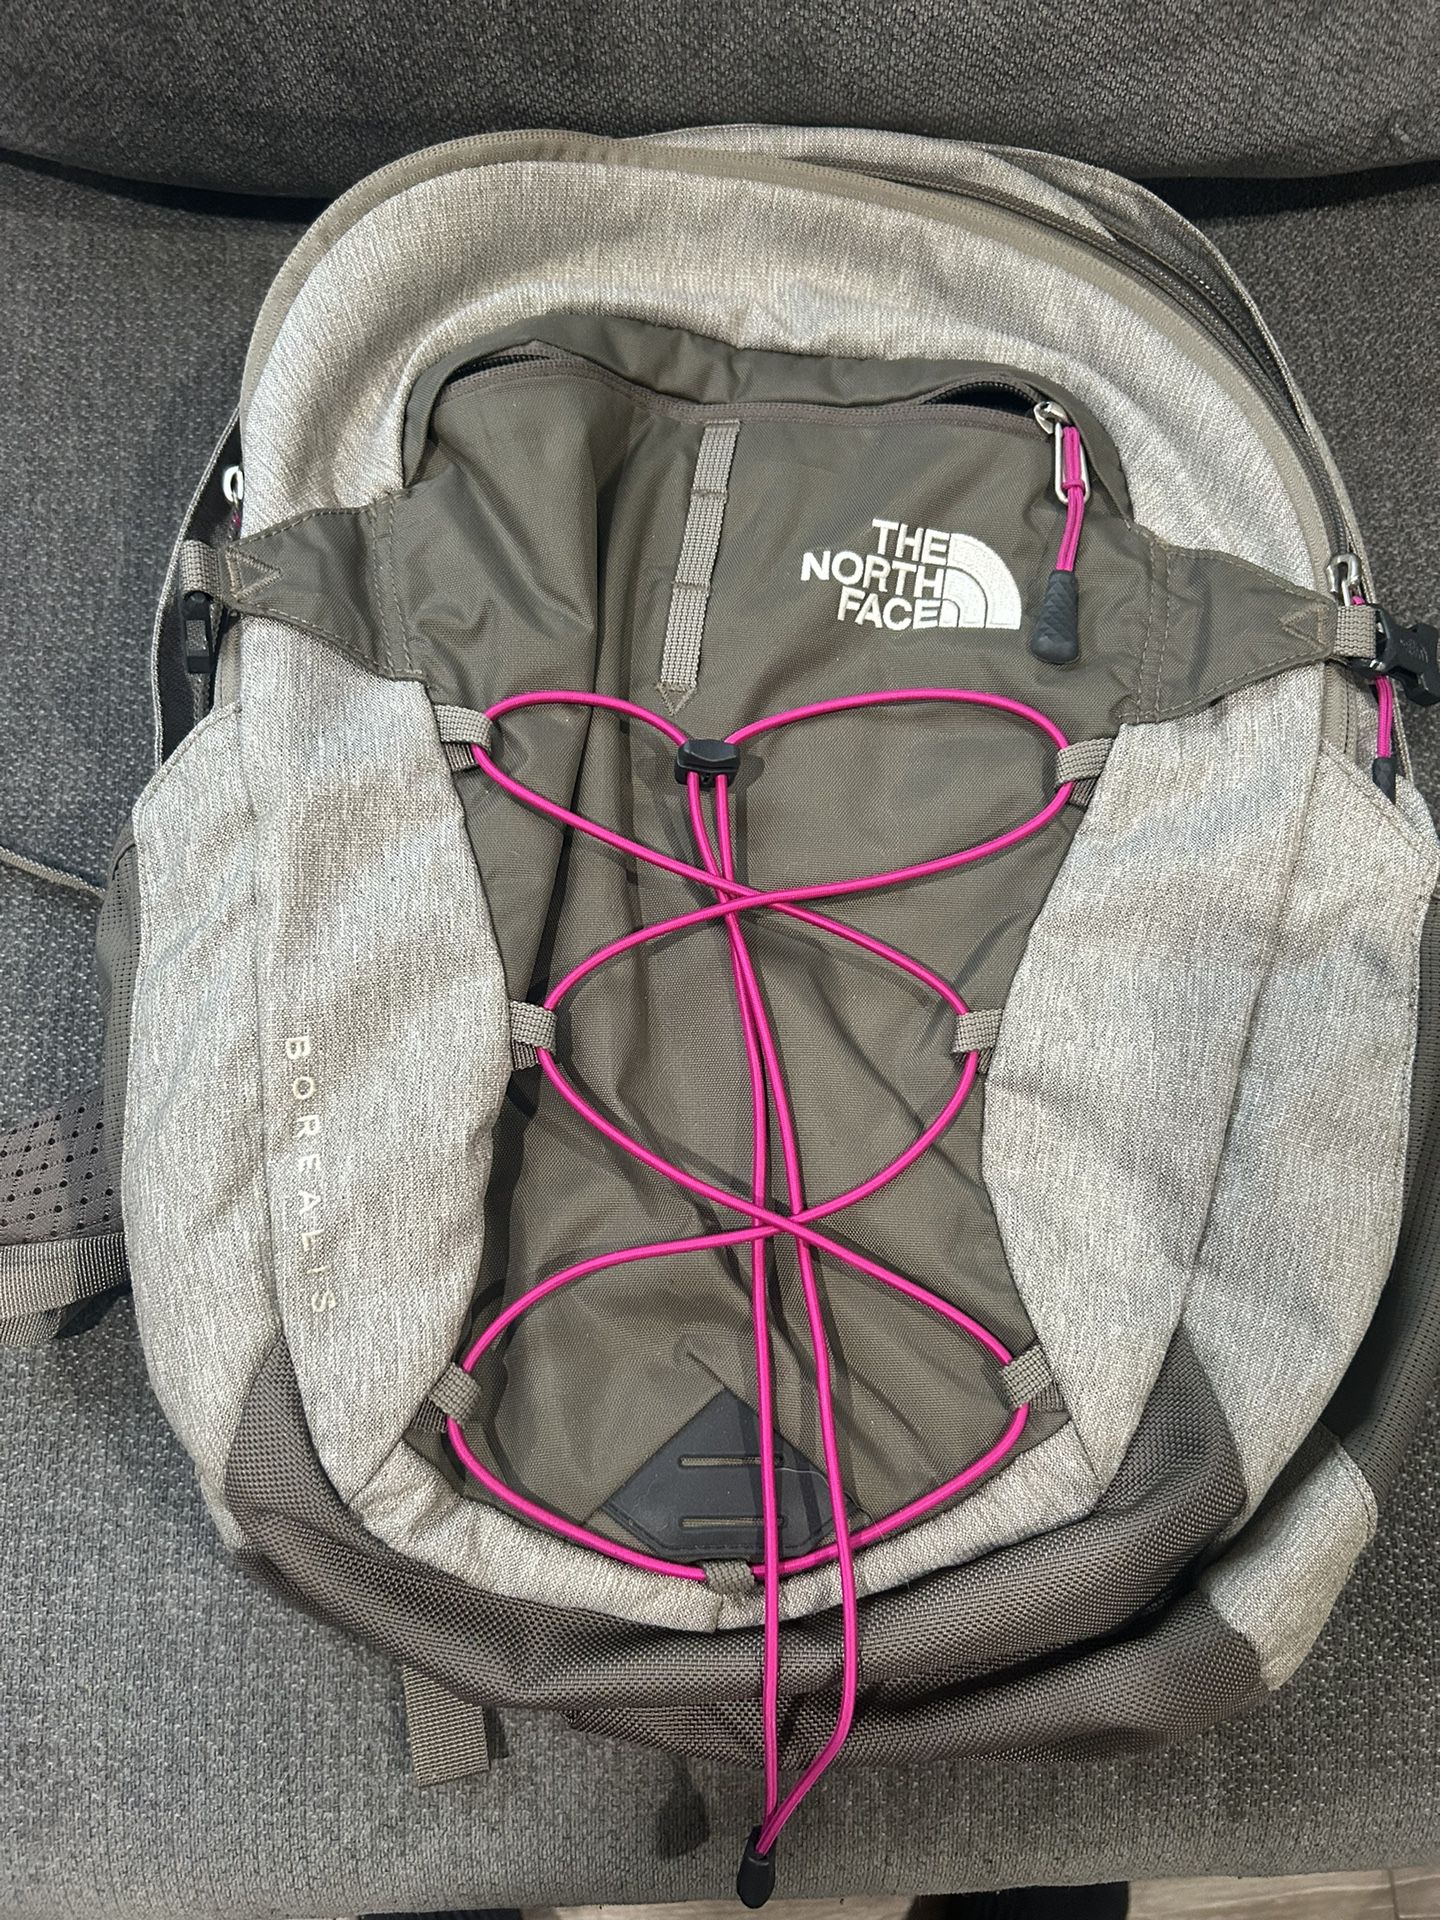 The North Face Backpack Borealis Model